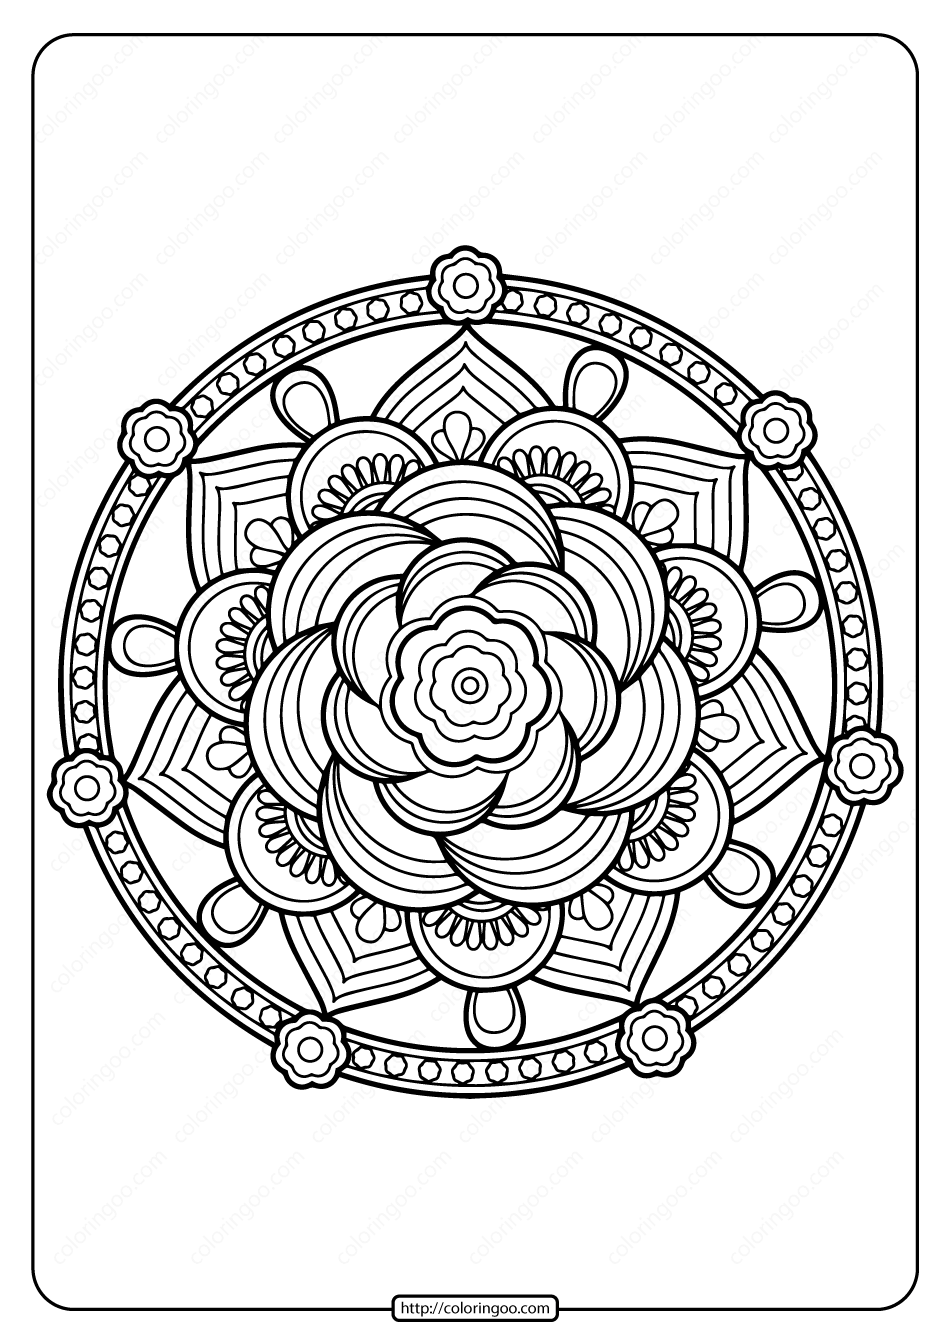 Printable PDF Coloring Book Pages for Adults 013